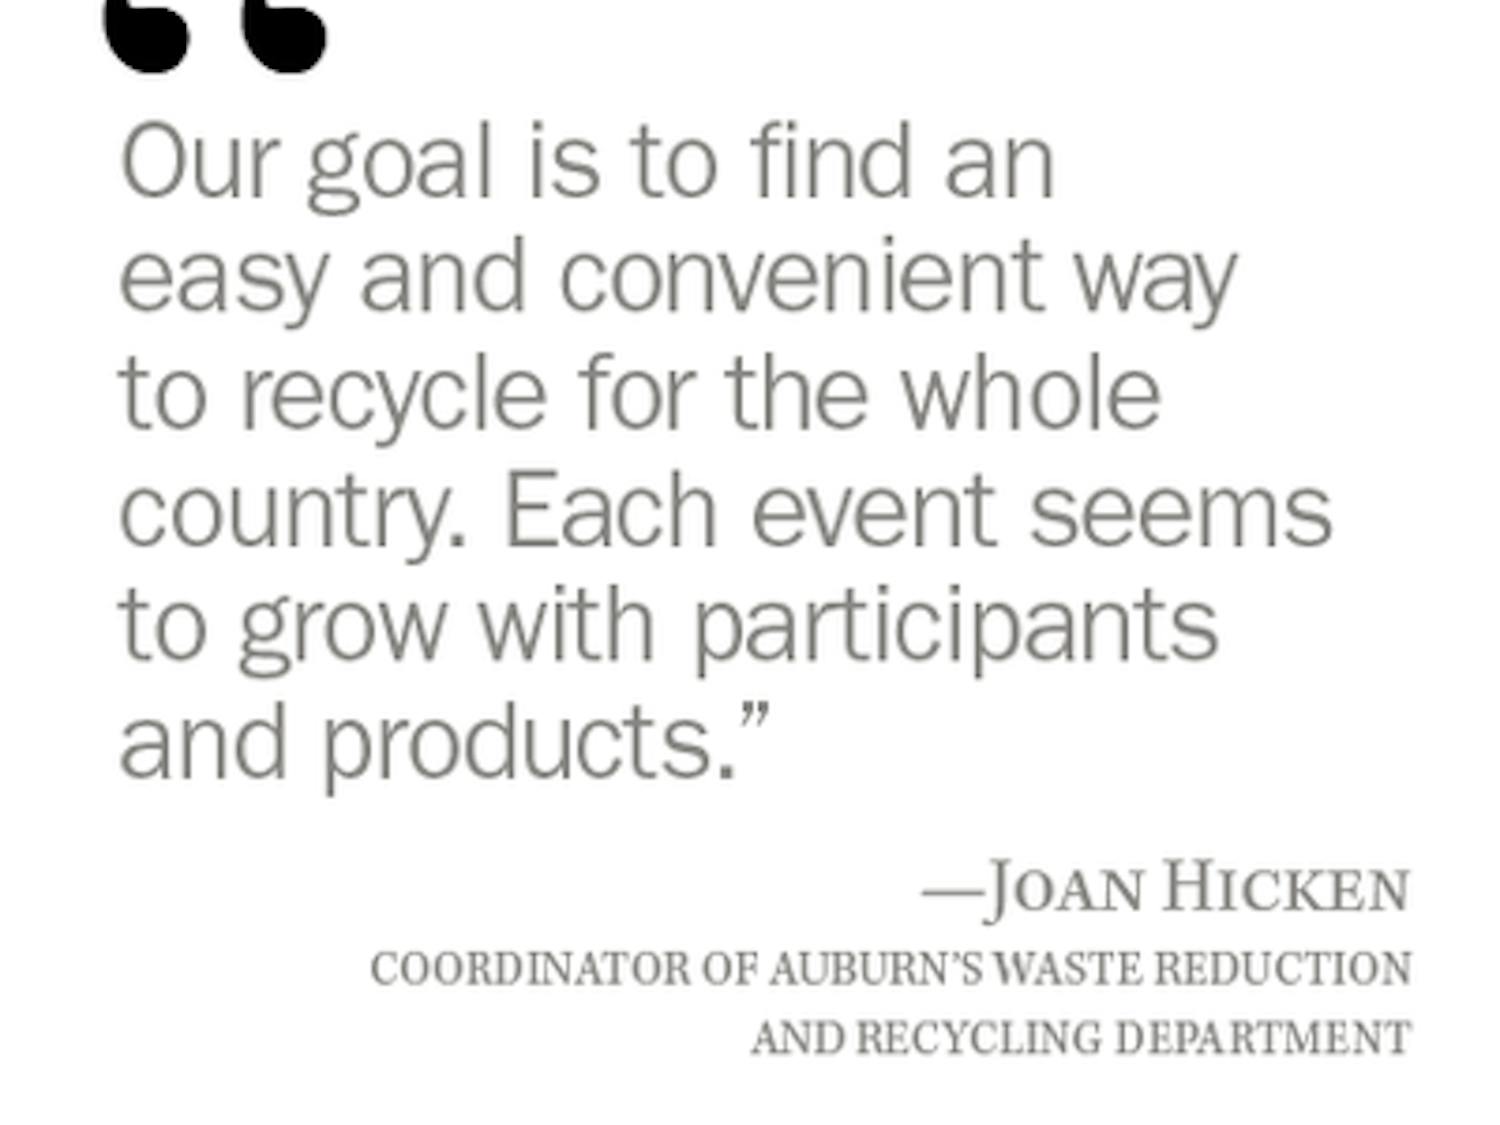 Joan Hicken, Coordinator of Auburn's WAste Reduction and REcycling department pull quote